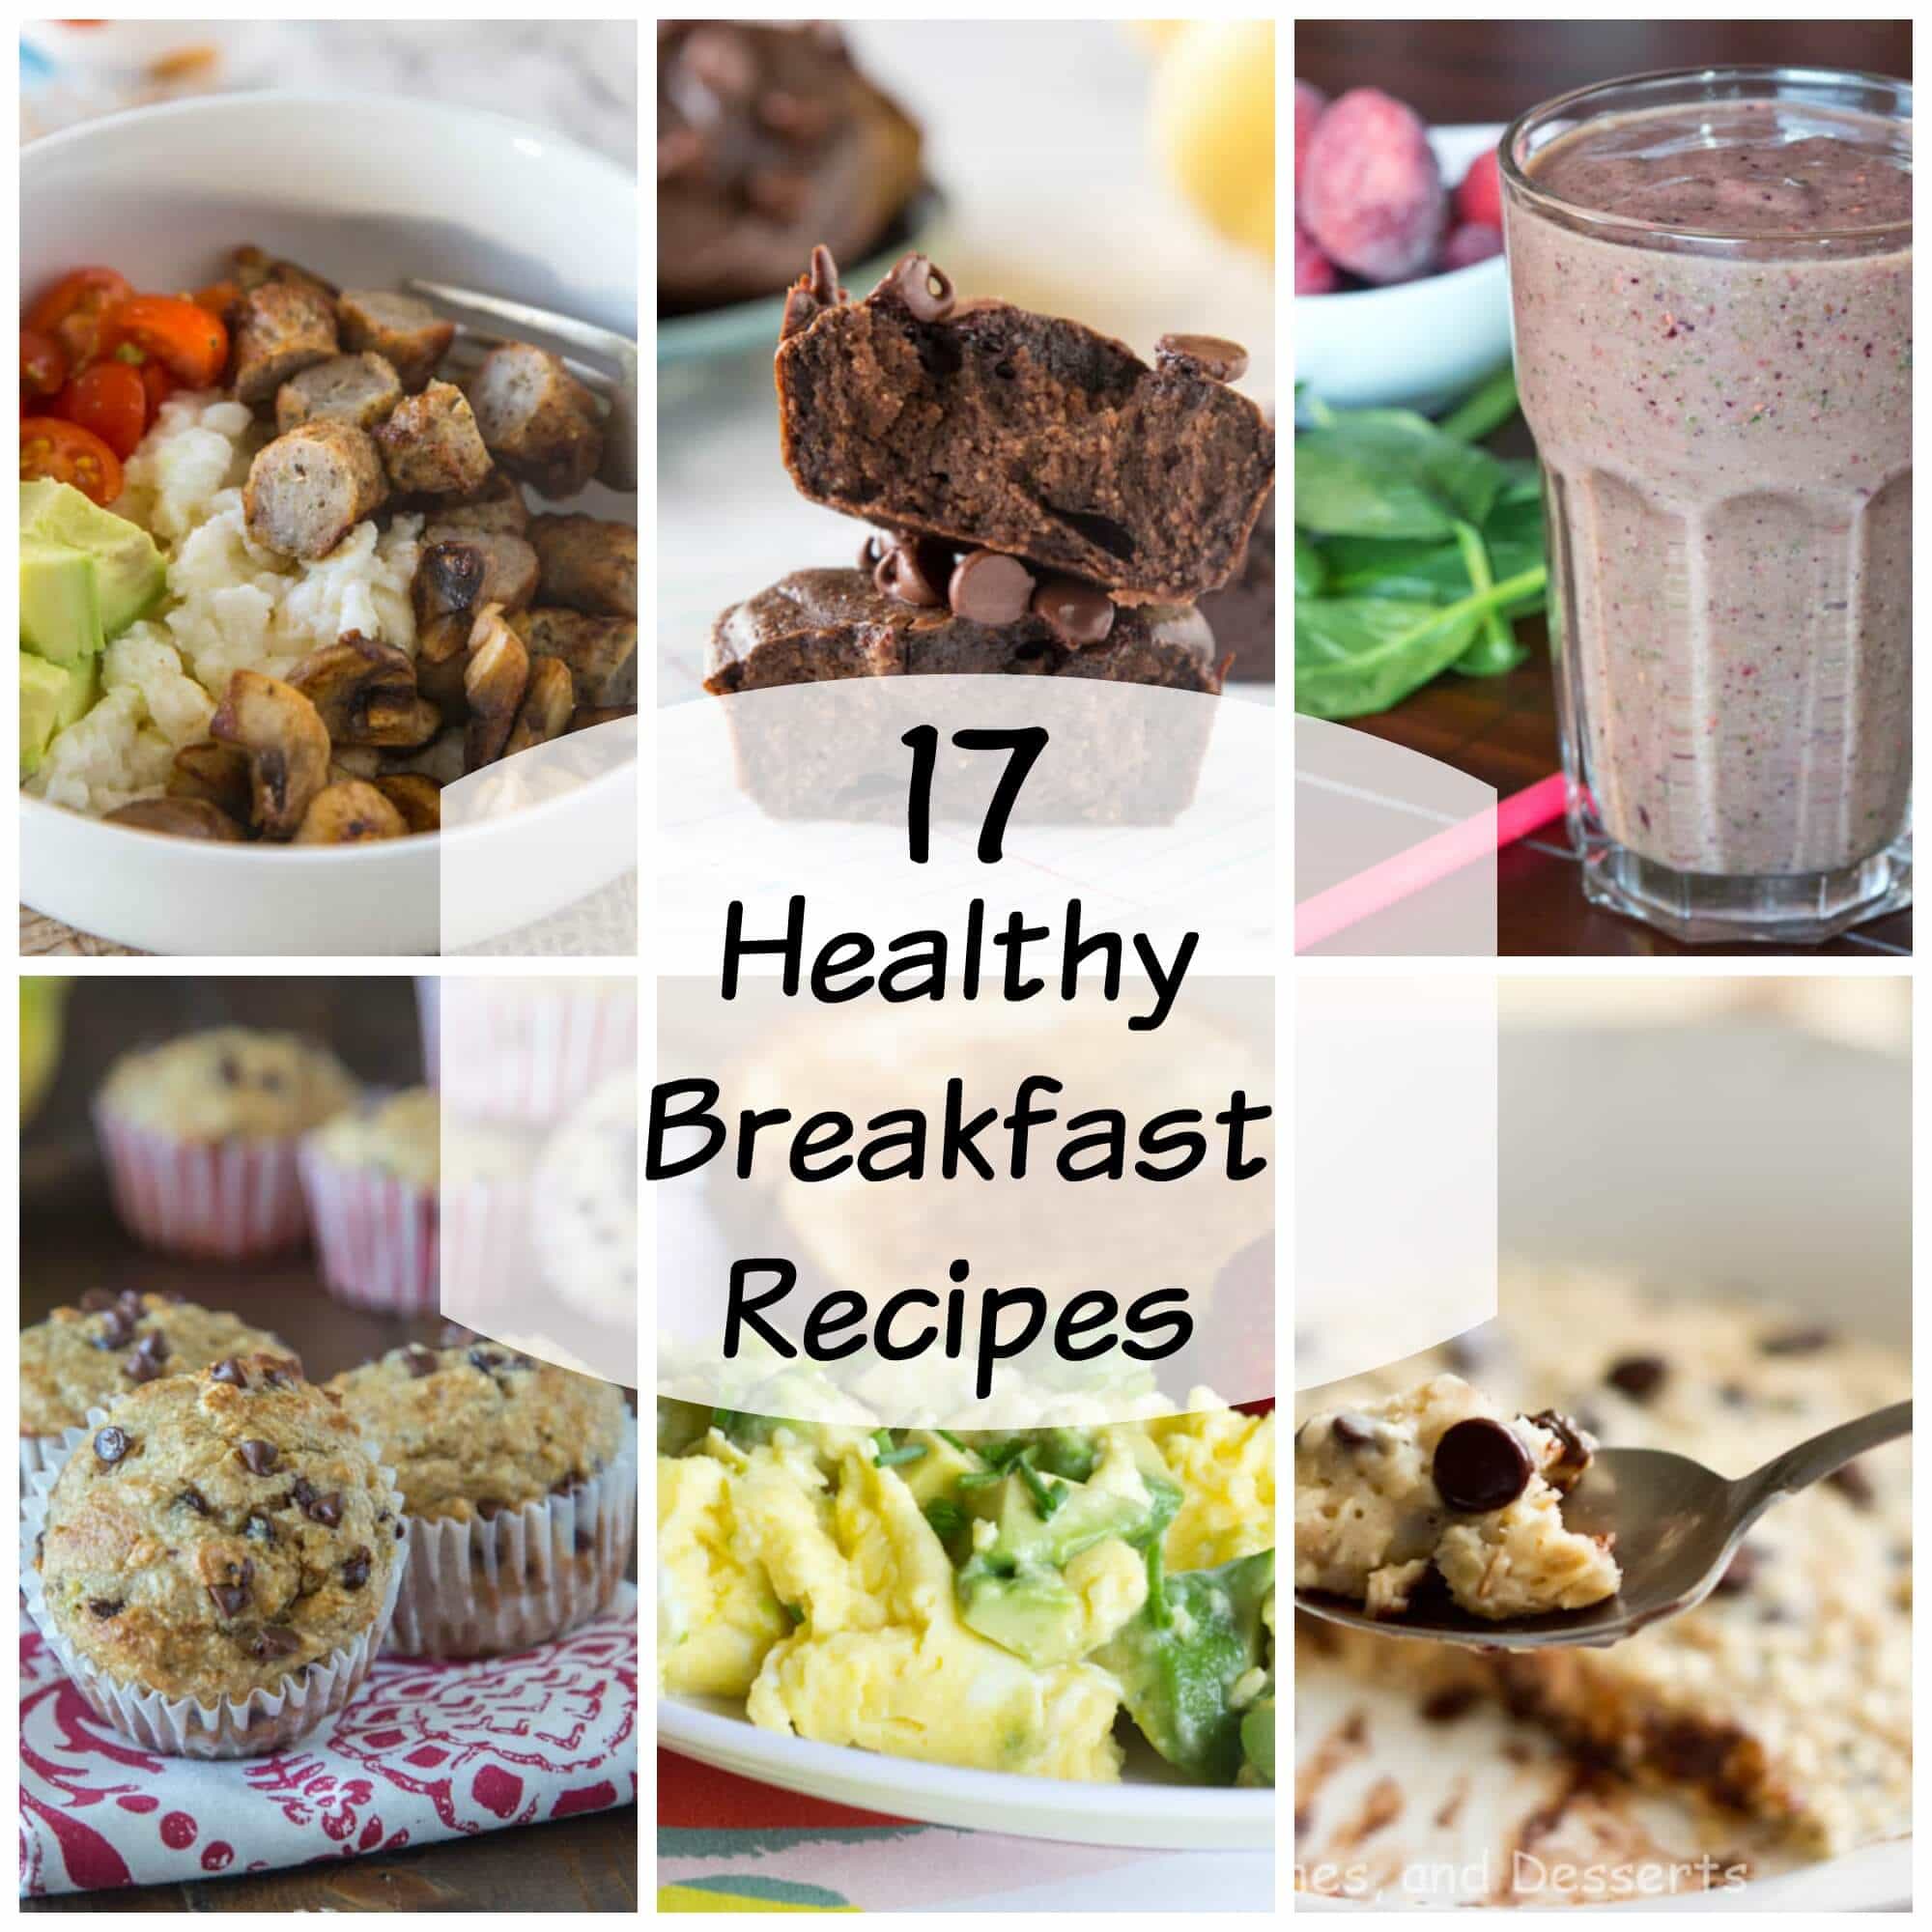 Healthy Breakfast Recipes - Dinners, Dishes, and Desserts